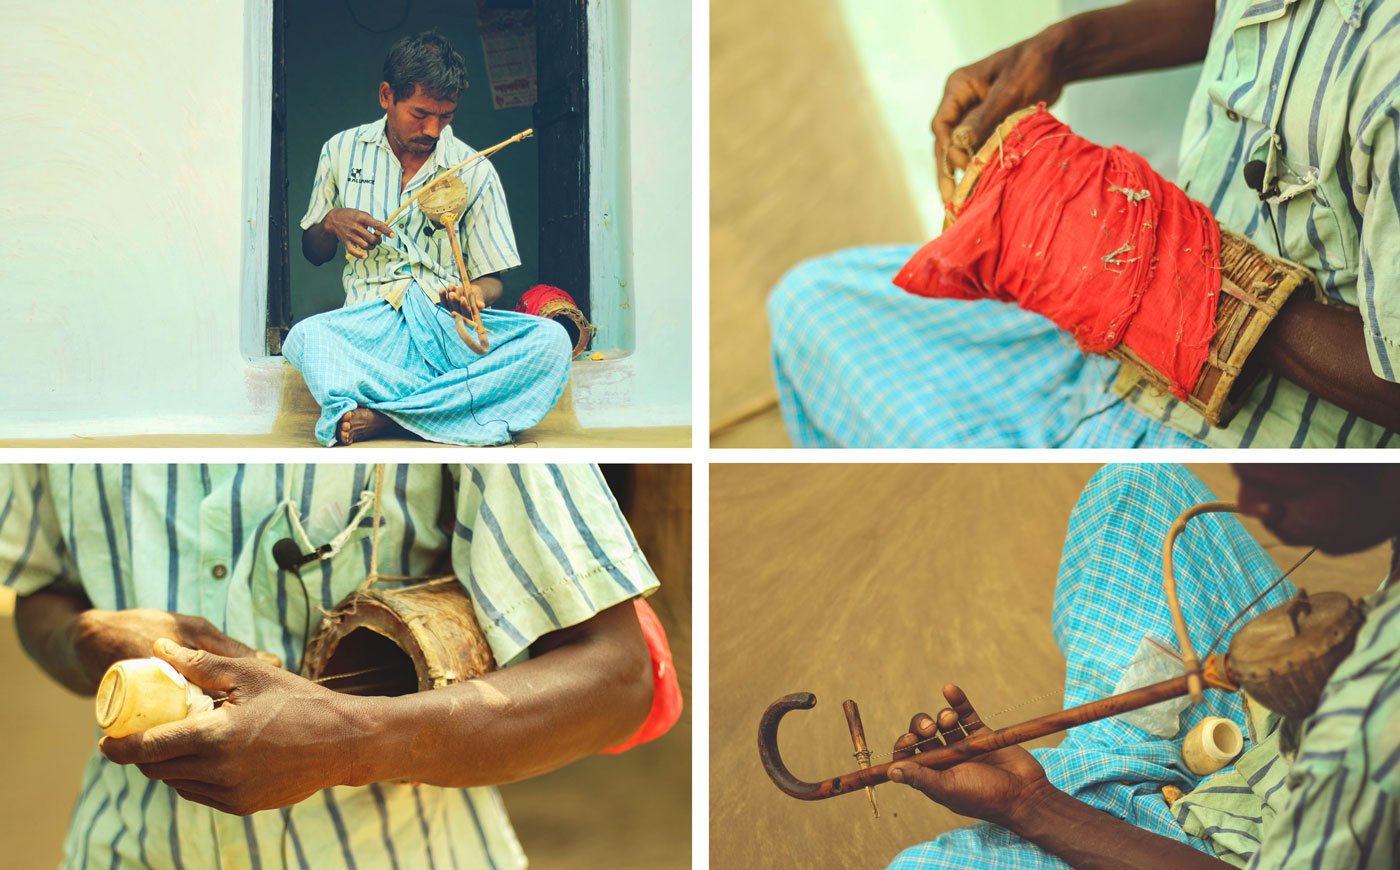 Top left: Ganesh Soren at his doorstep with his whimsical fantor banam. Top right, bottom left: Ganesh's signature gabgubi, with his son’s dhol as the main part, along with an old Pond’s container. Bottom right: His banam, made with coconut shell covered with hide, fastened to an umbrella handle with nuts and bolts